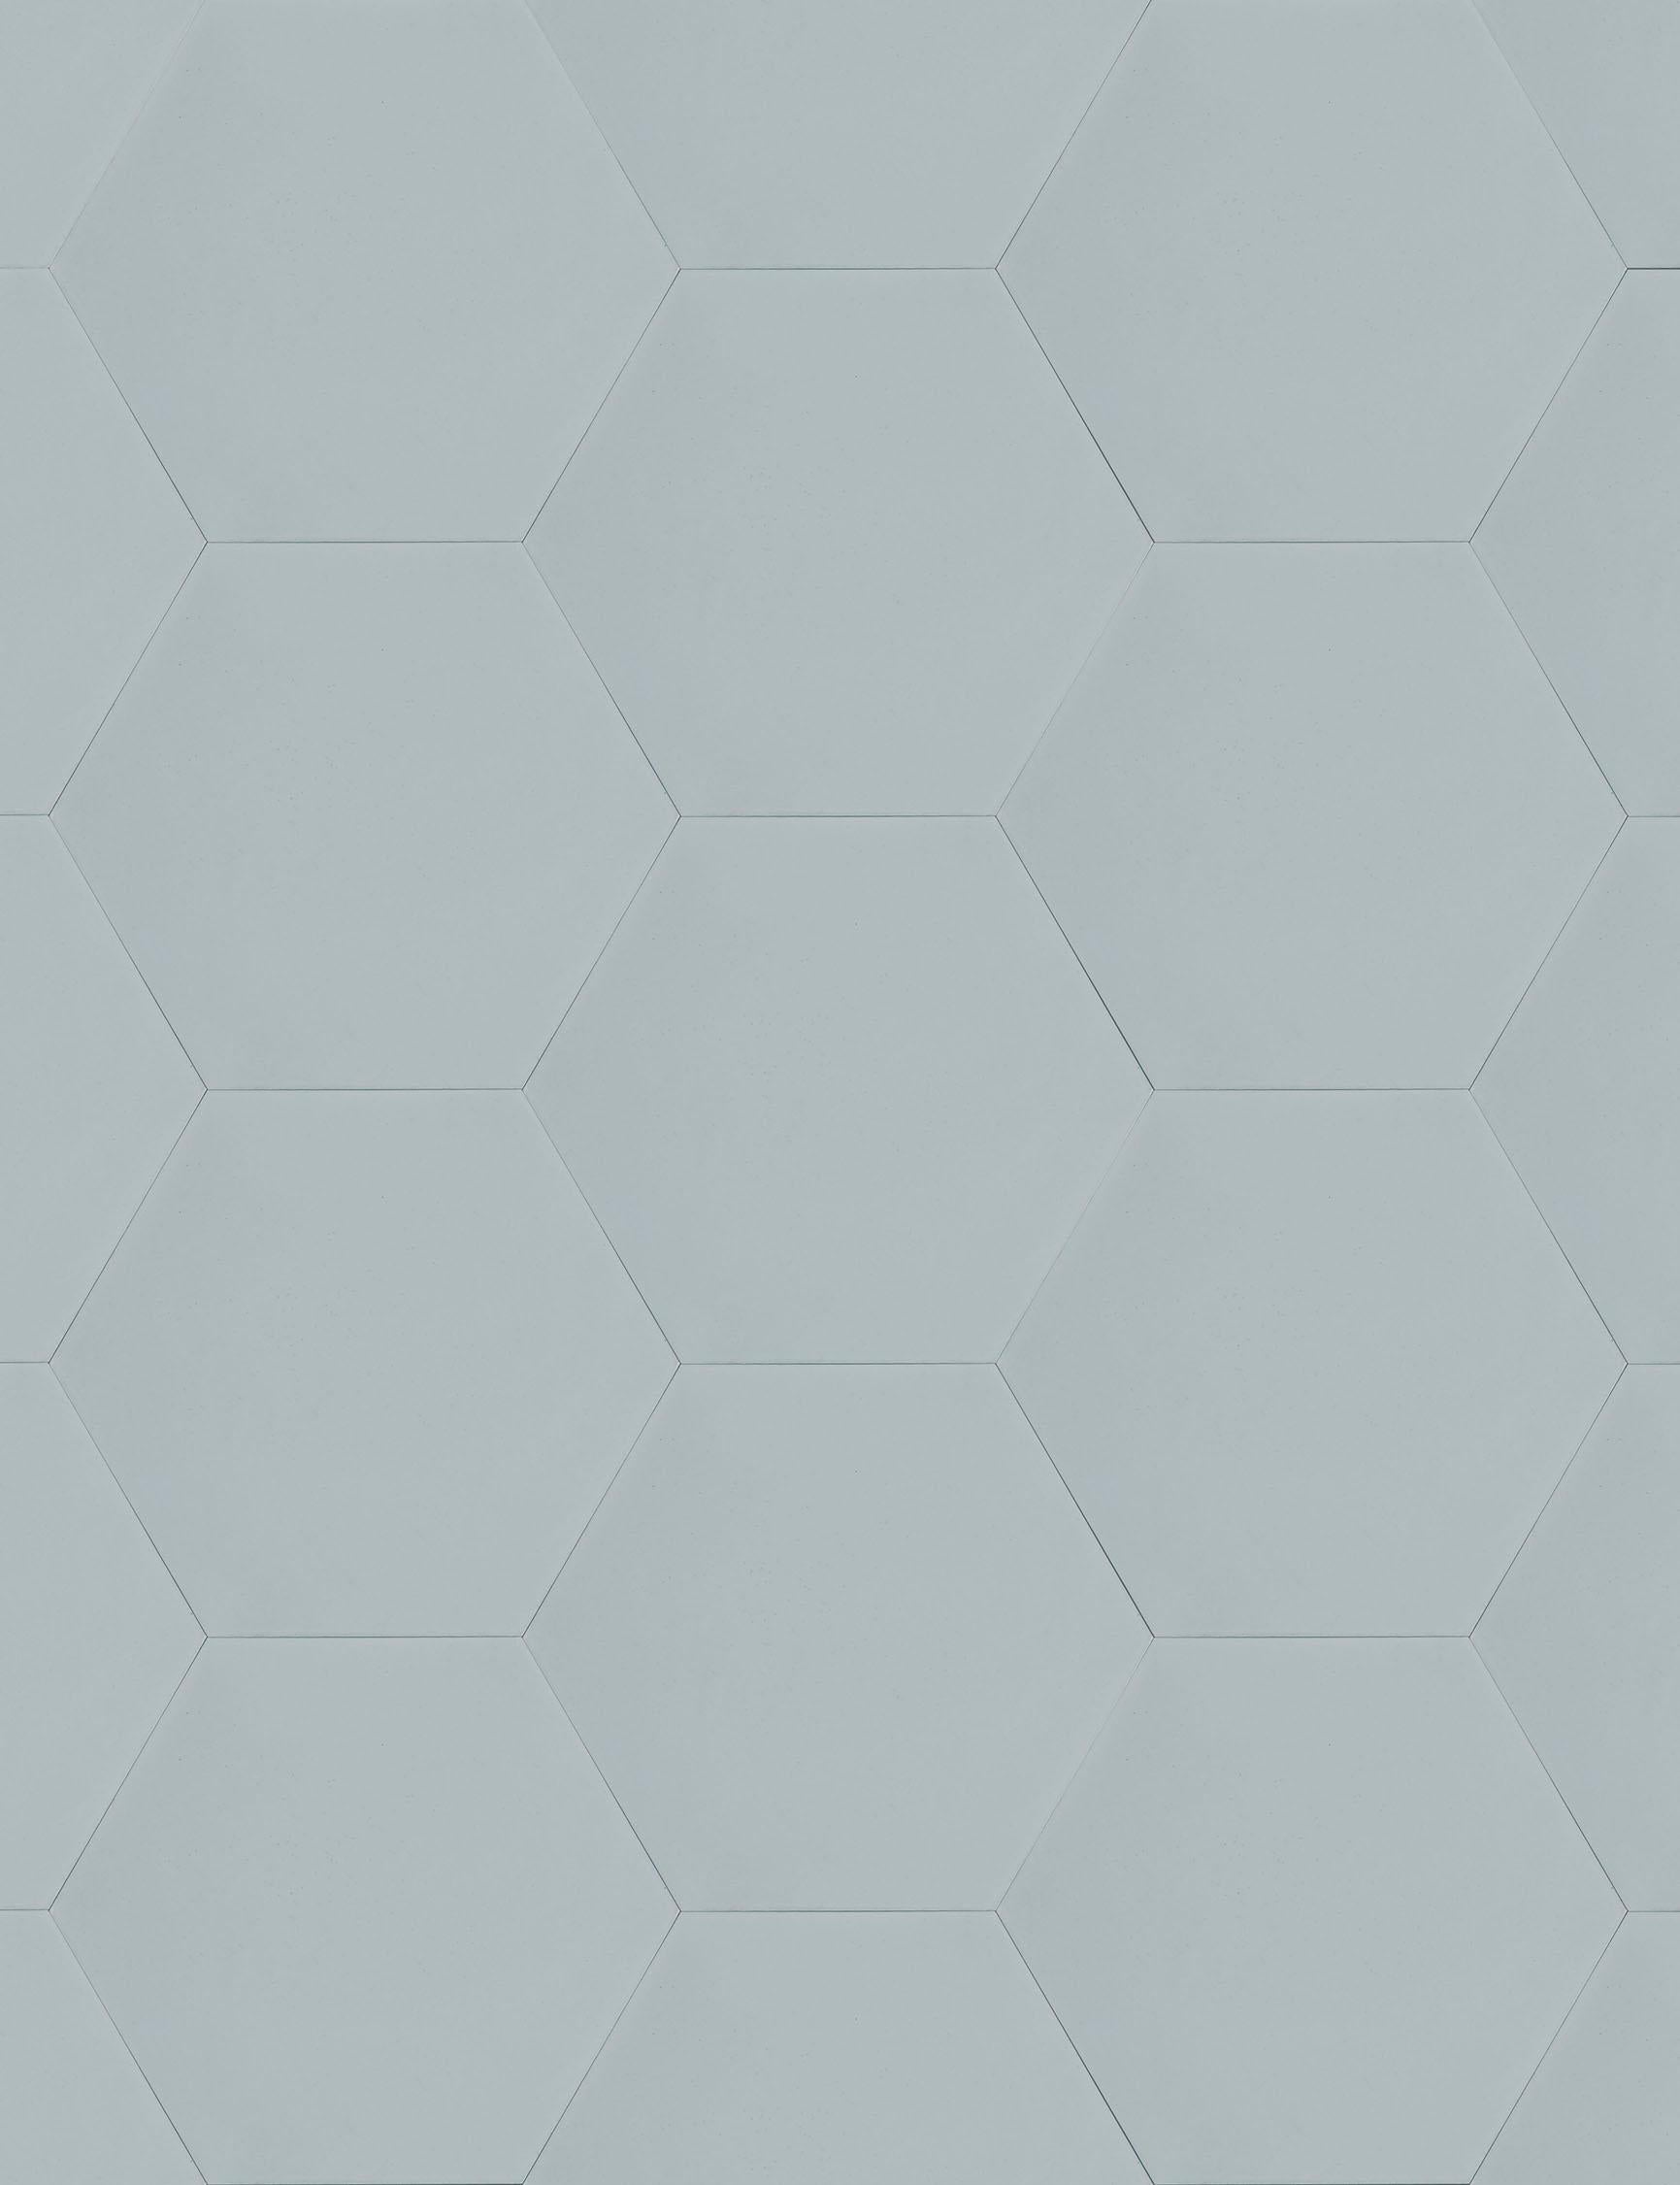 Available in our full palette in both cement and ceramic tile, these solid-shade hexagonal tiles can stand alone or mix with other colors to create a multi-color surface. They can also be coordinated with our moon phase tiles for a calming mix of